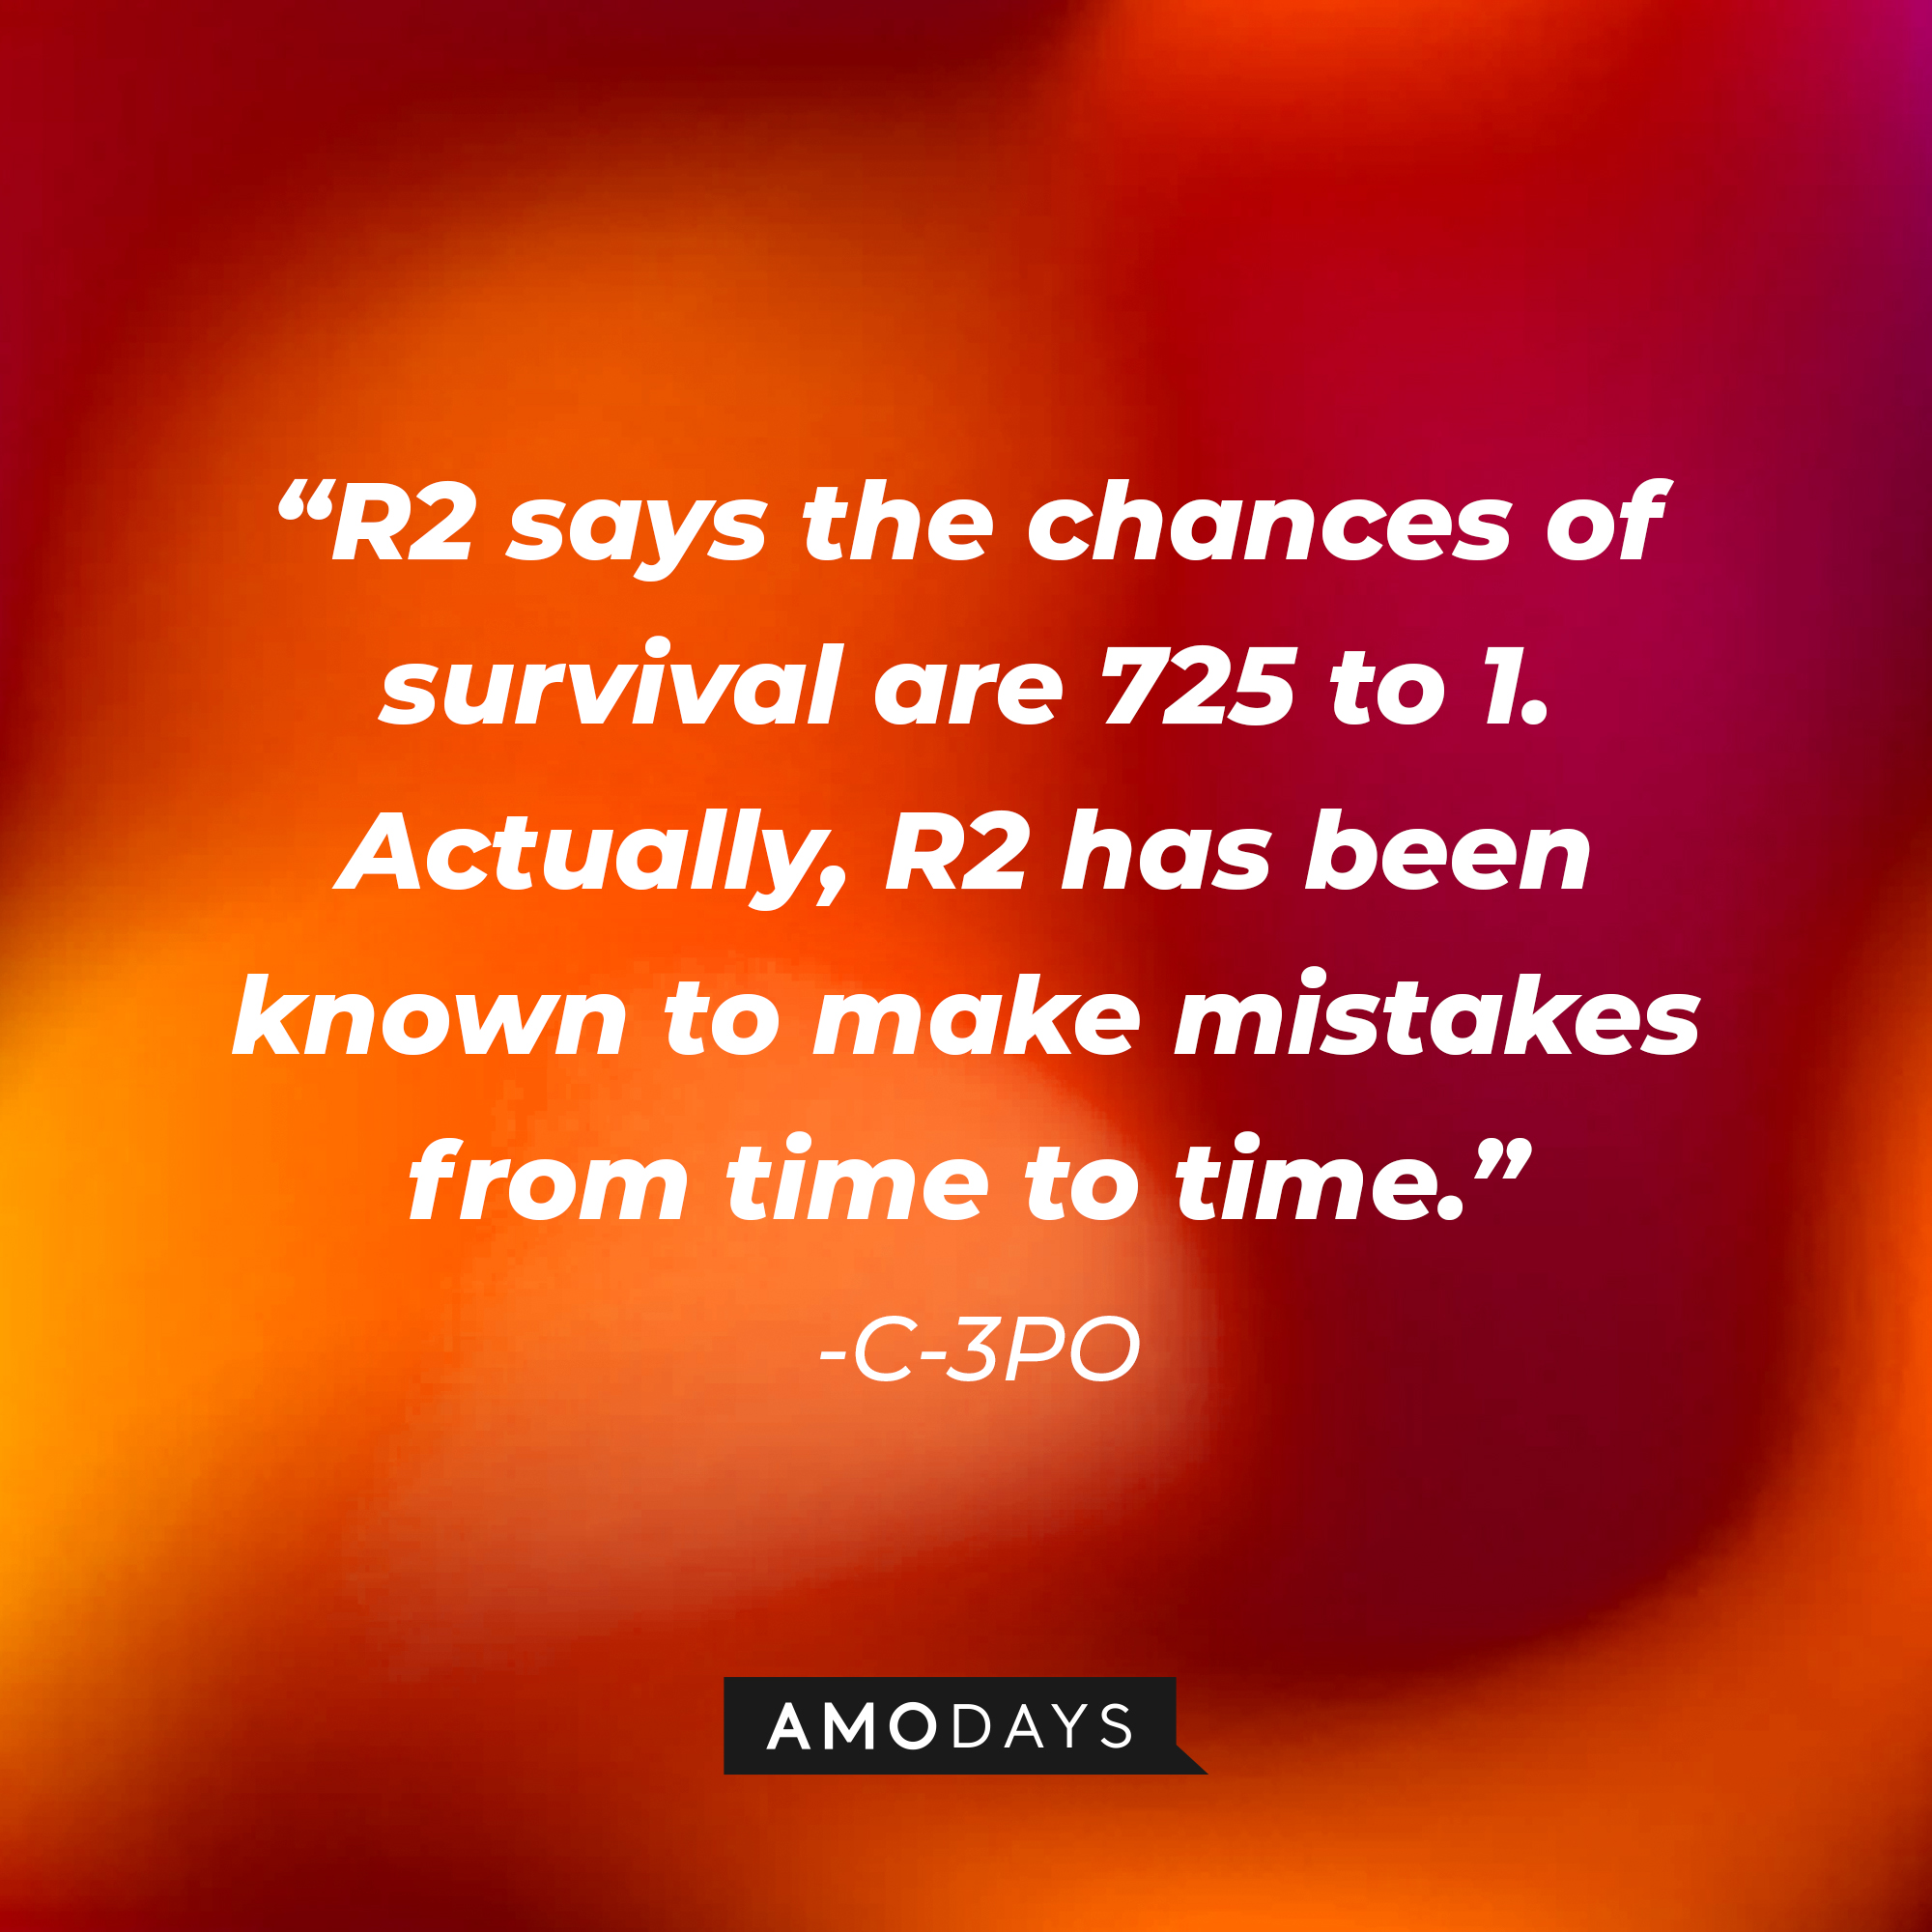 C-3PO's quote: "R2 says the chances of survival are 725 to 1. Actually, R2 has been known to make mistakes from time to time." | Source: AmoDays